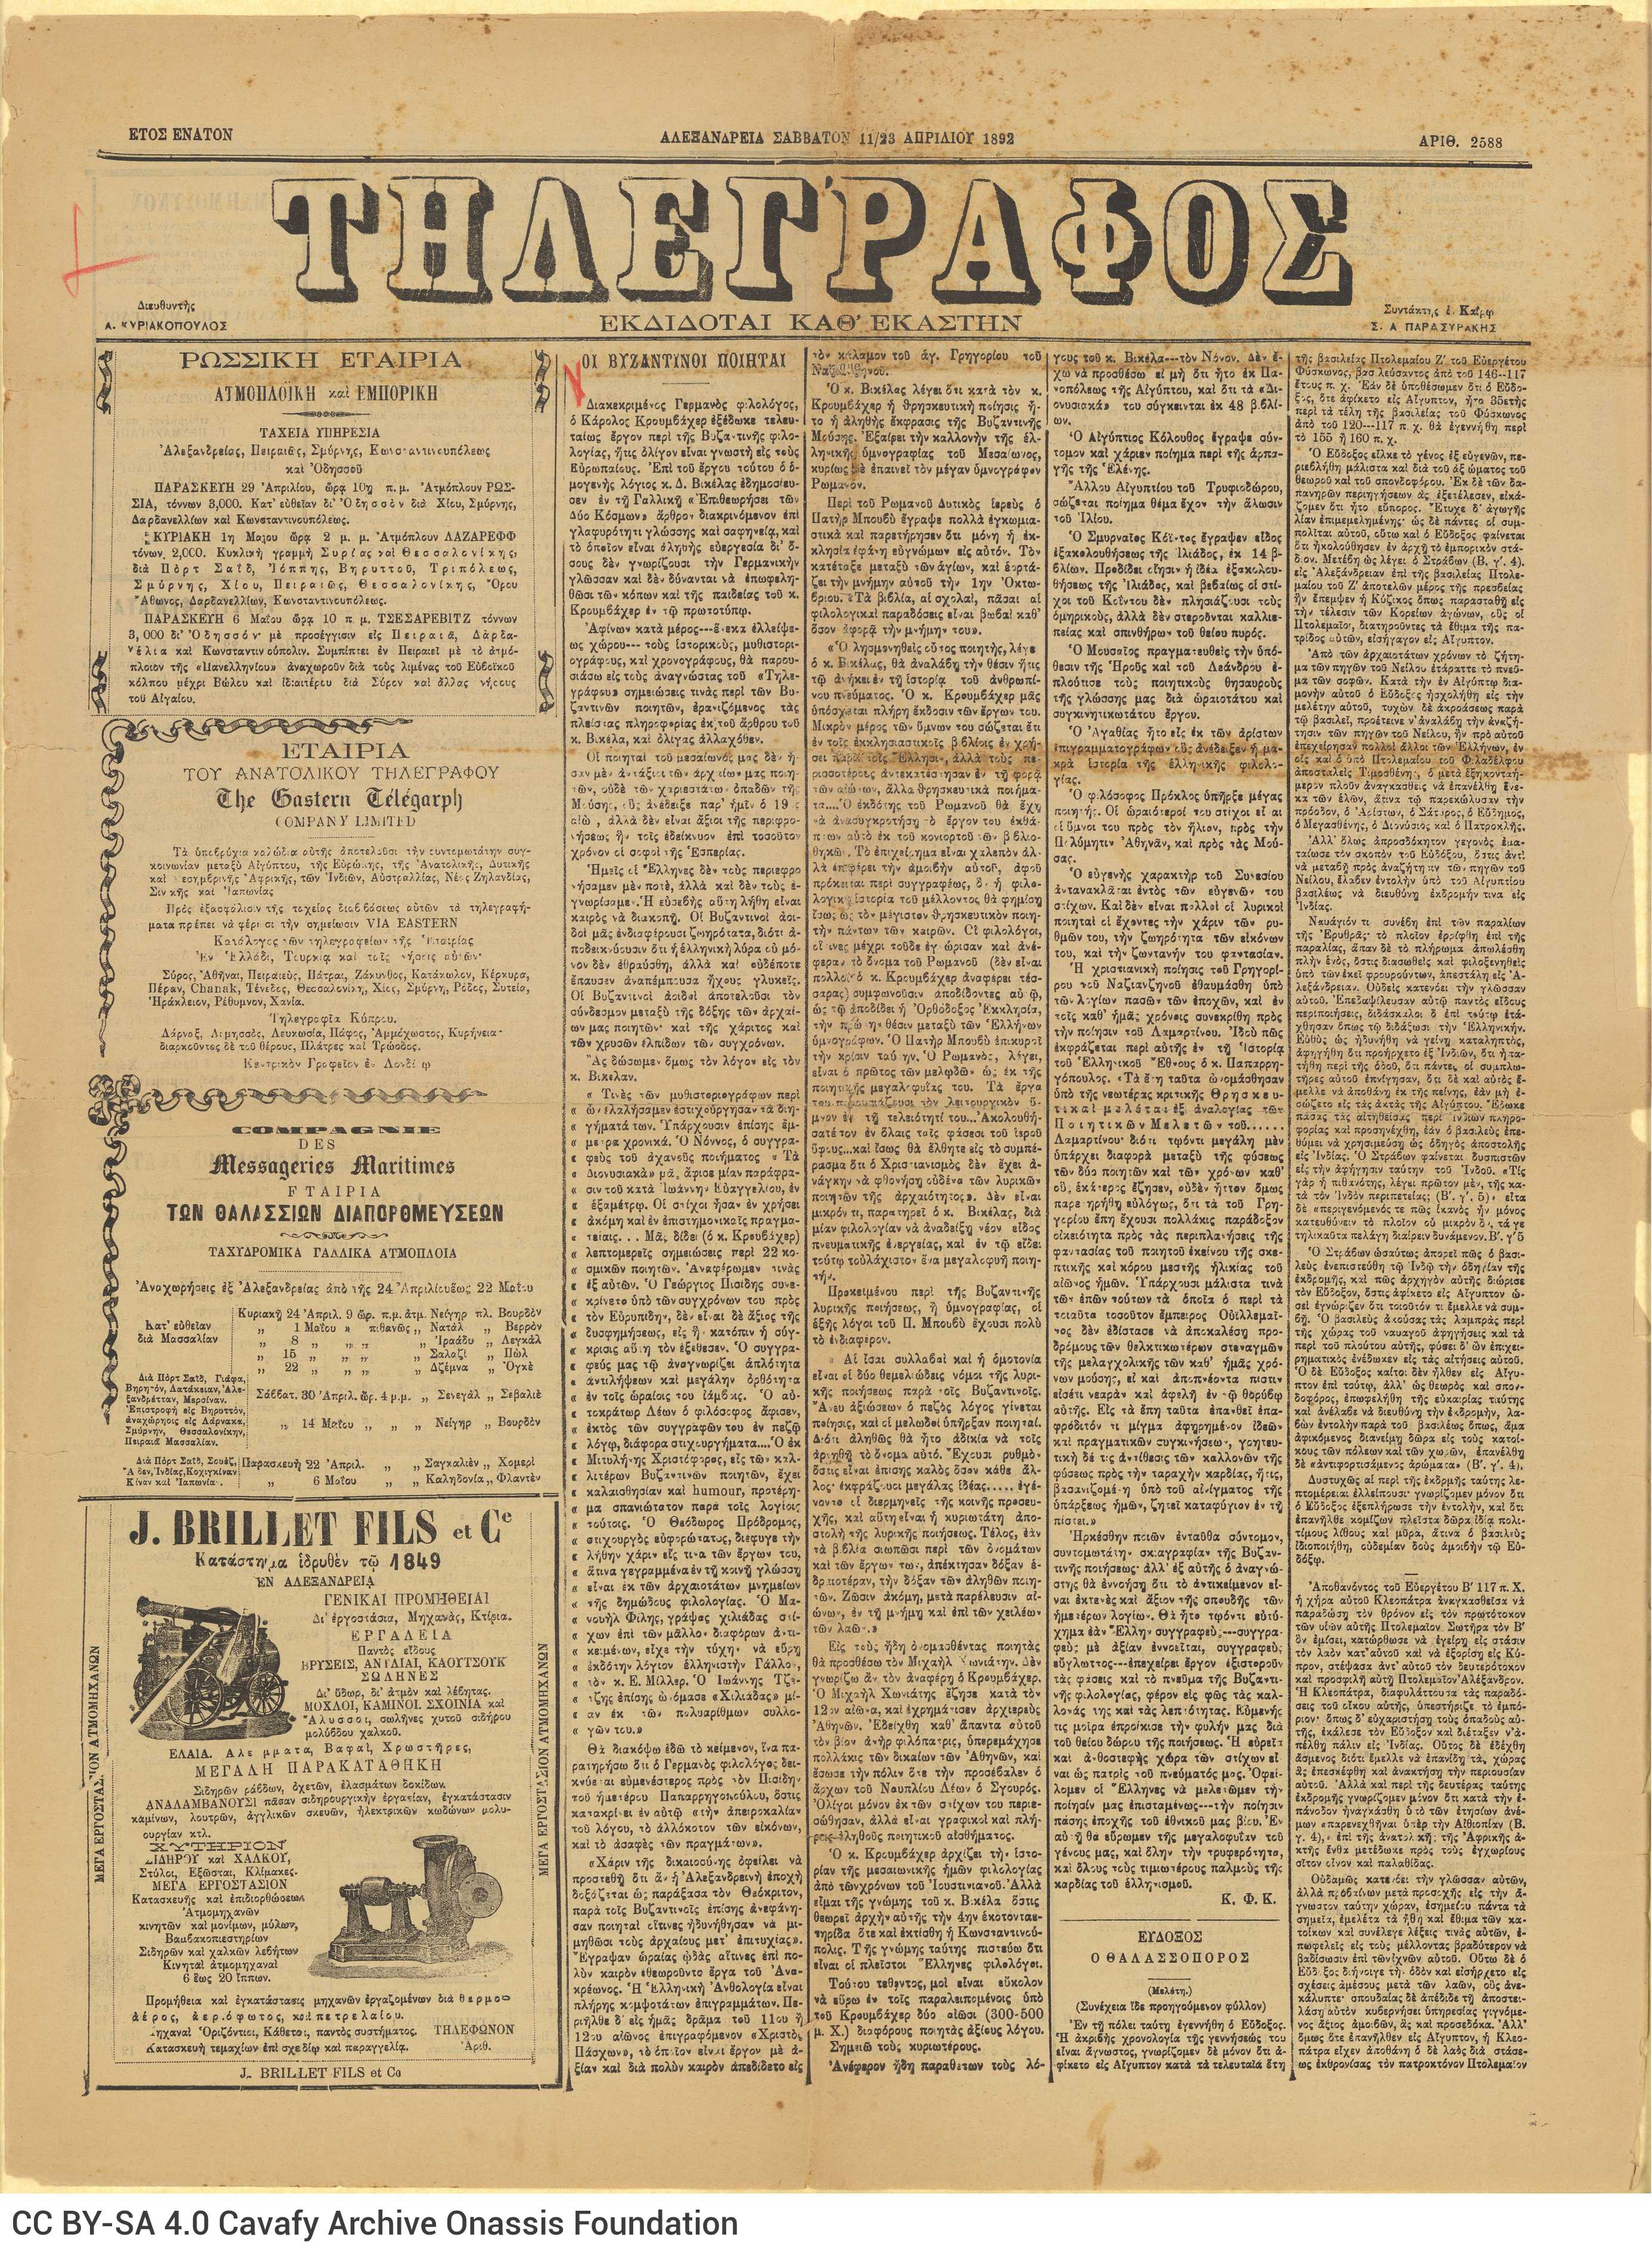 Issue No 2588 of the newspaper *Tilegrafos* of Alexandria. Cavafy's article "The Byzantine Poets", signed "C.F.C.", in the fi